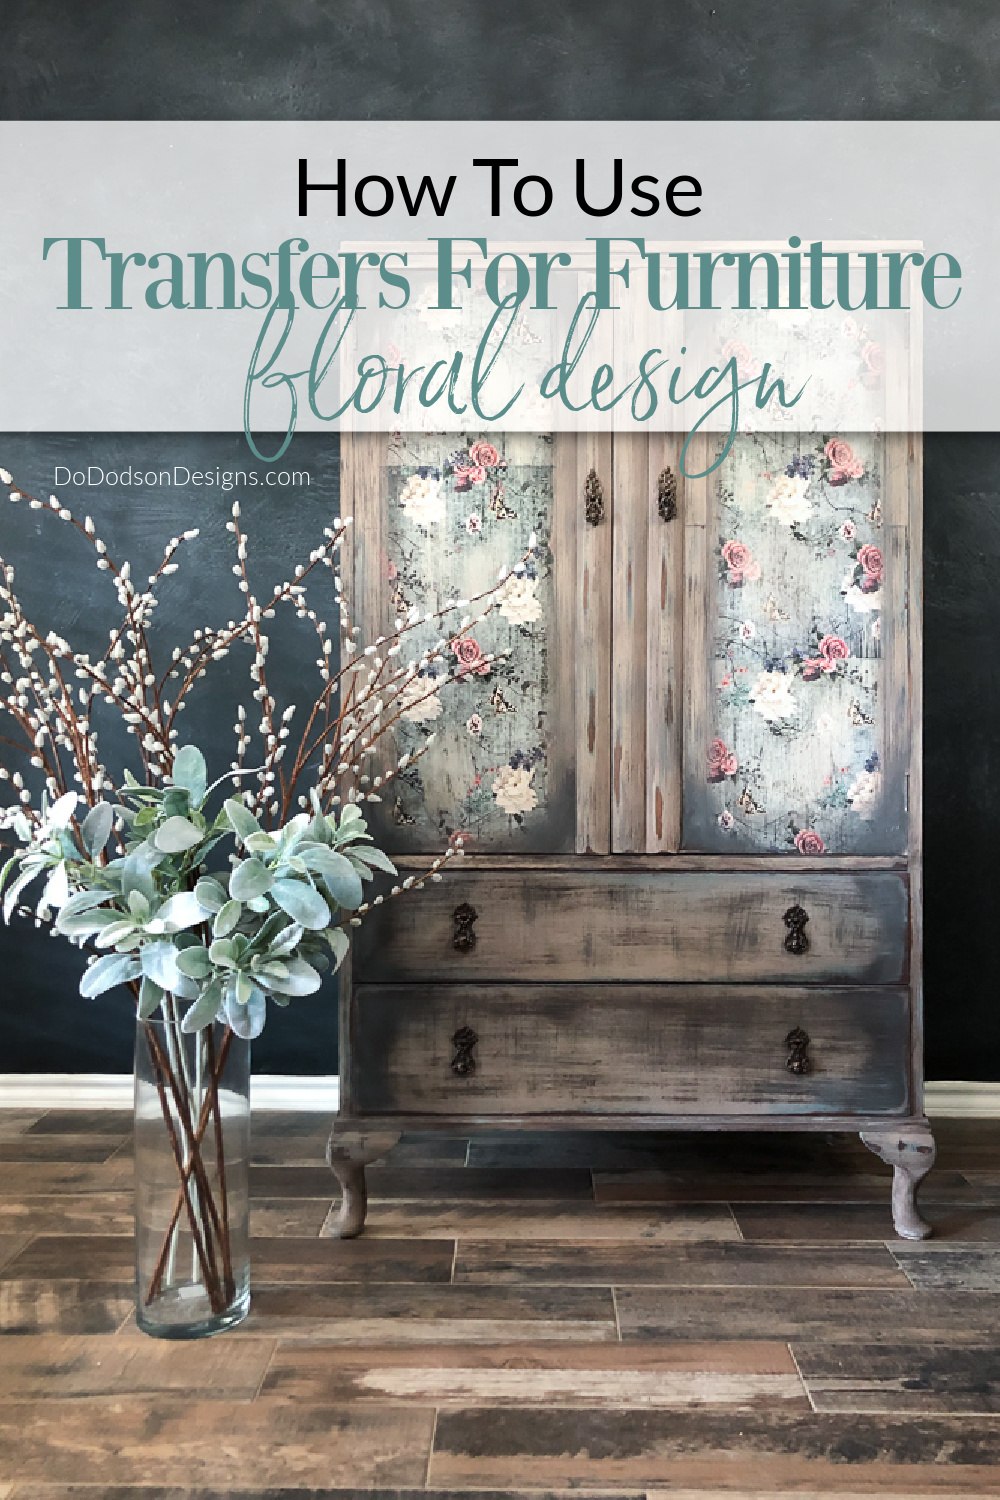 How To Use Transfers For Furniture | Floral Designs